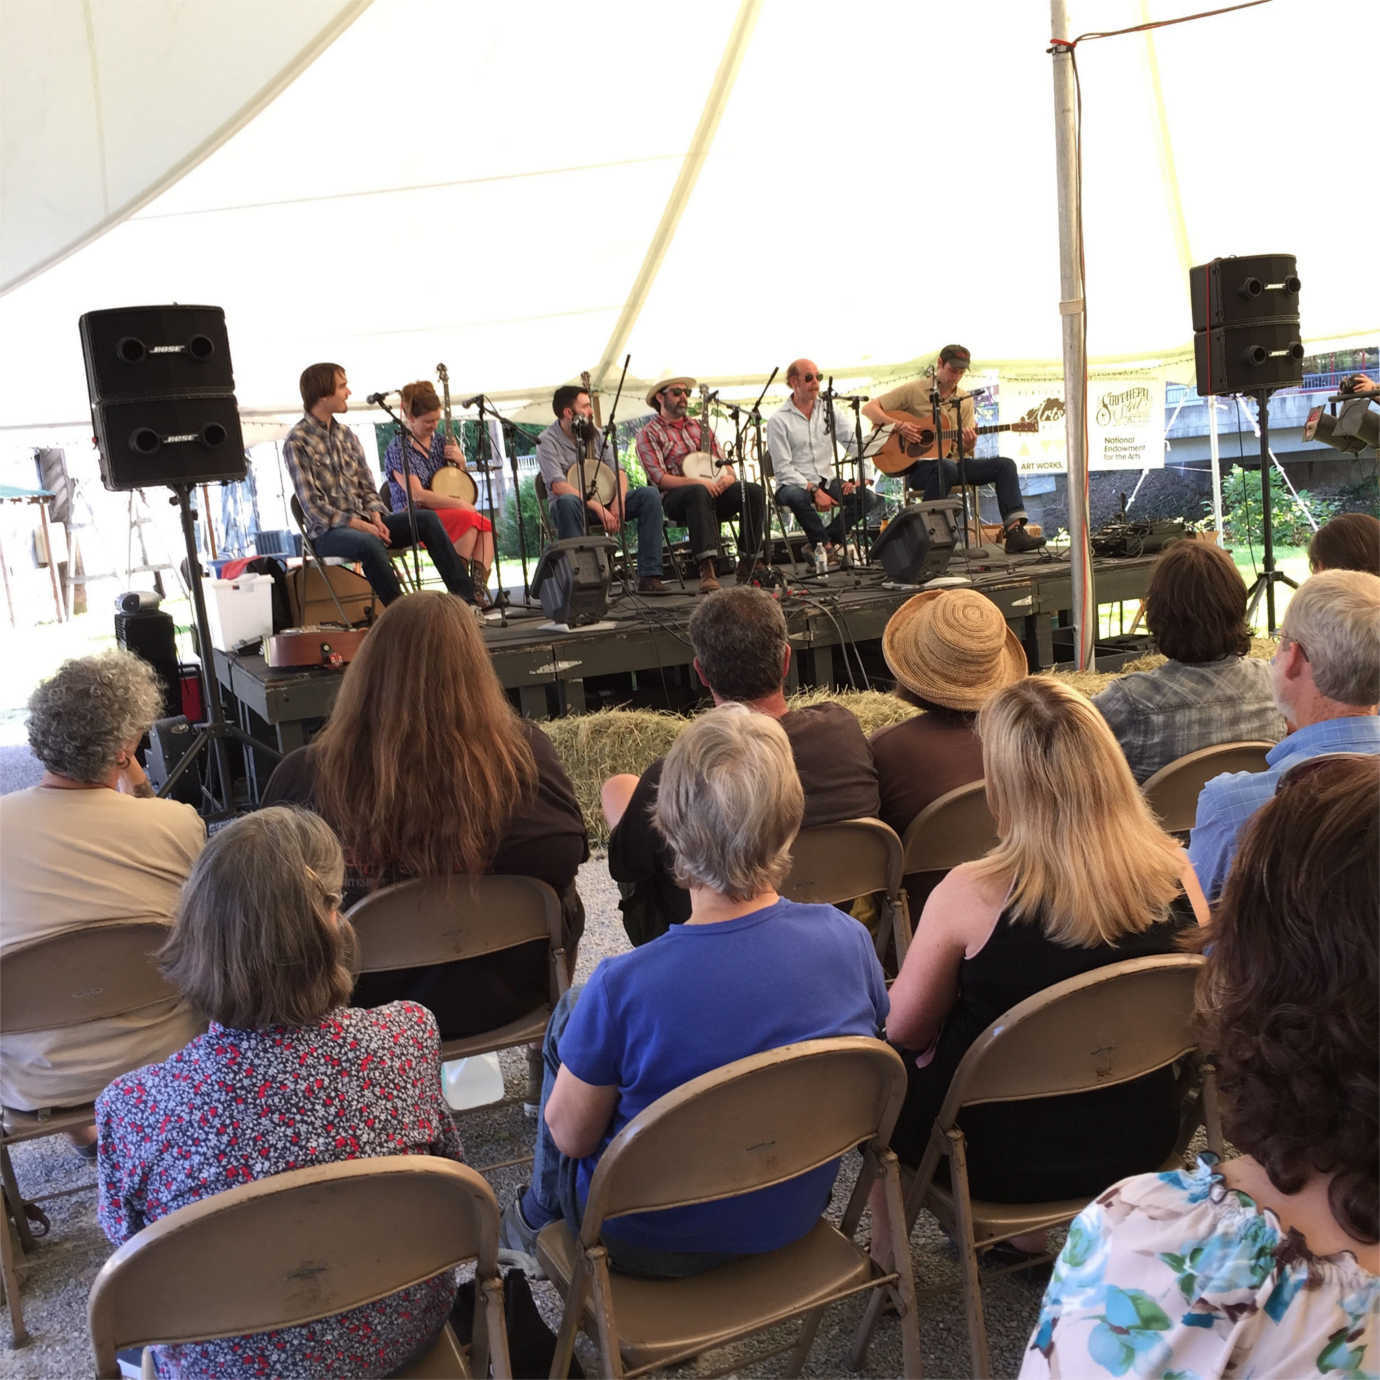 At Appalshop's 2015 Seedtime Festival, musicians performed and reflected on eastern Kentucky songs recorded by folklorist Alan Lomax. The event was in celebration of the Lomax Centennial and the repatriation of eastern Kentucky recordings, which were deposited at Appalshop Archive. Photo by Appalshop.